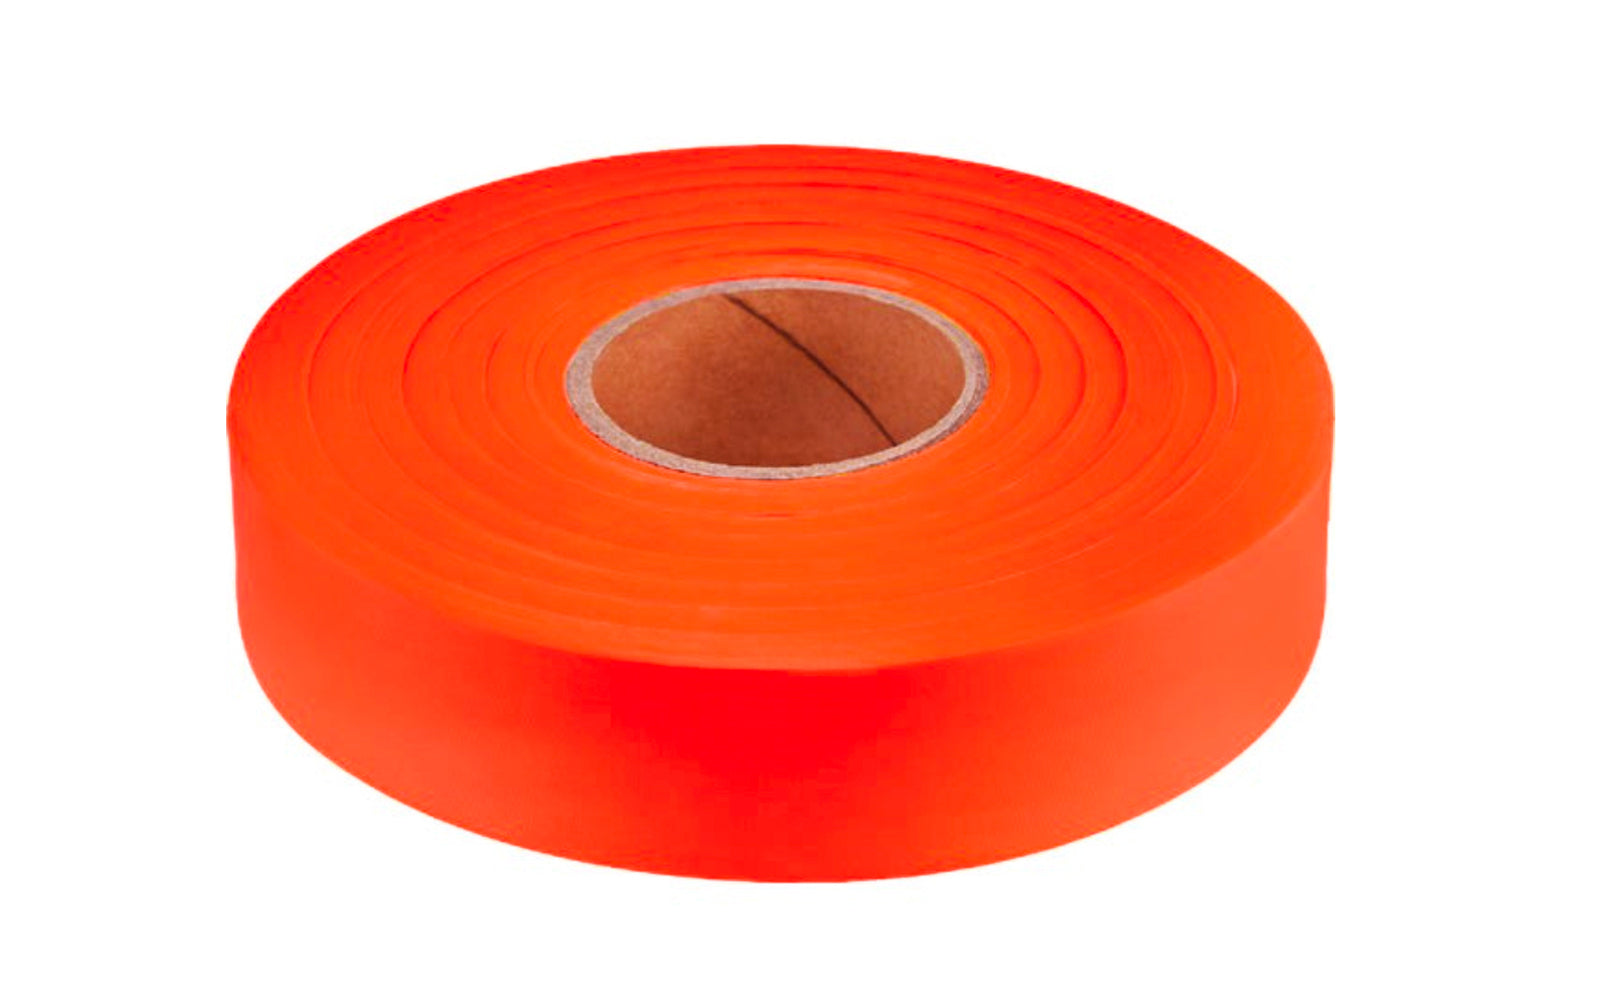 This Empire Fluorescent Orange Color Flagging Tape 1" x 600' is durable plastic tape that remains pliant in cold weather. Easy to tear & tie off. Tape is ideal for surveying projects, marking trails, & similar tasks, etc..  Model 77-062. 015812770621